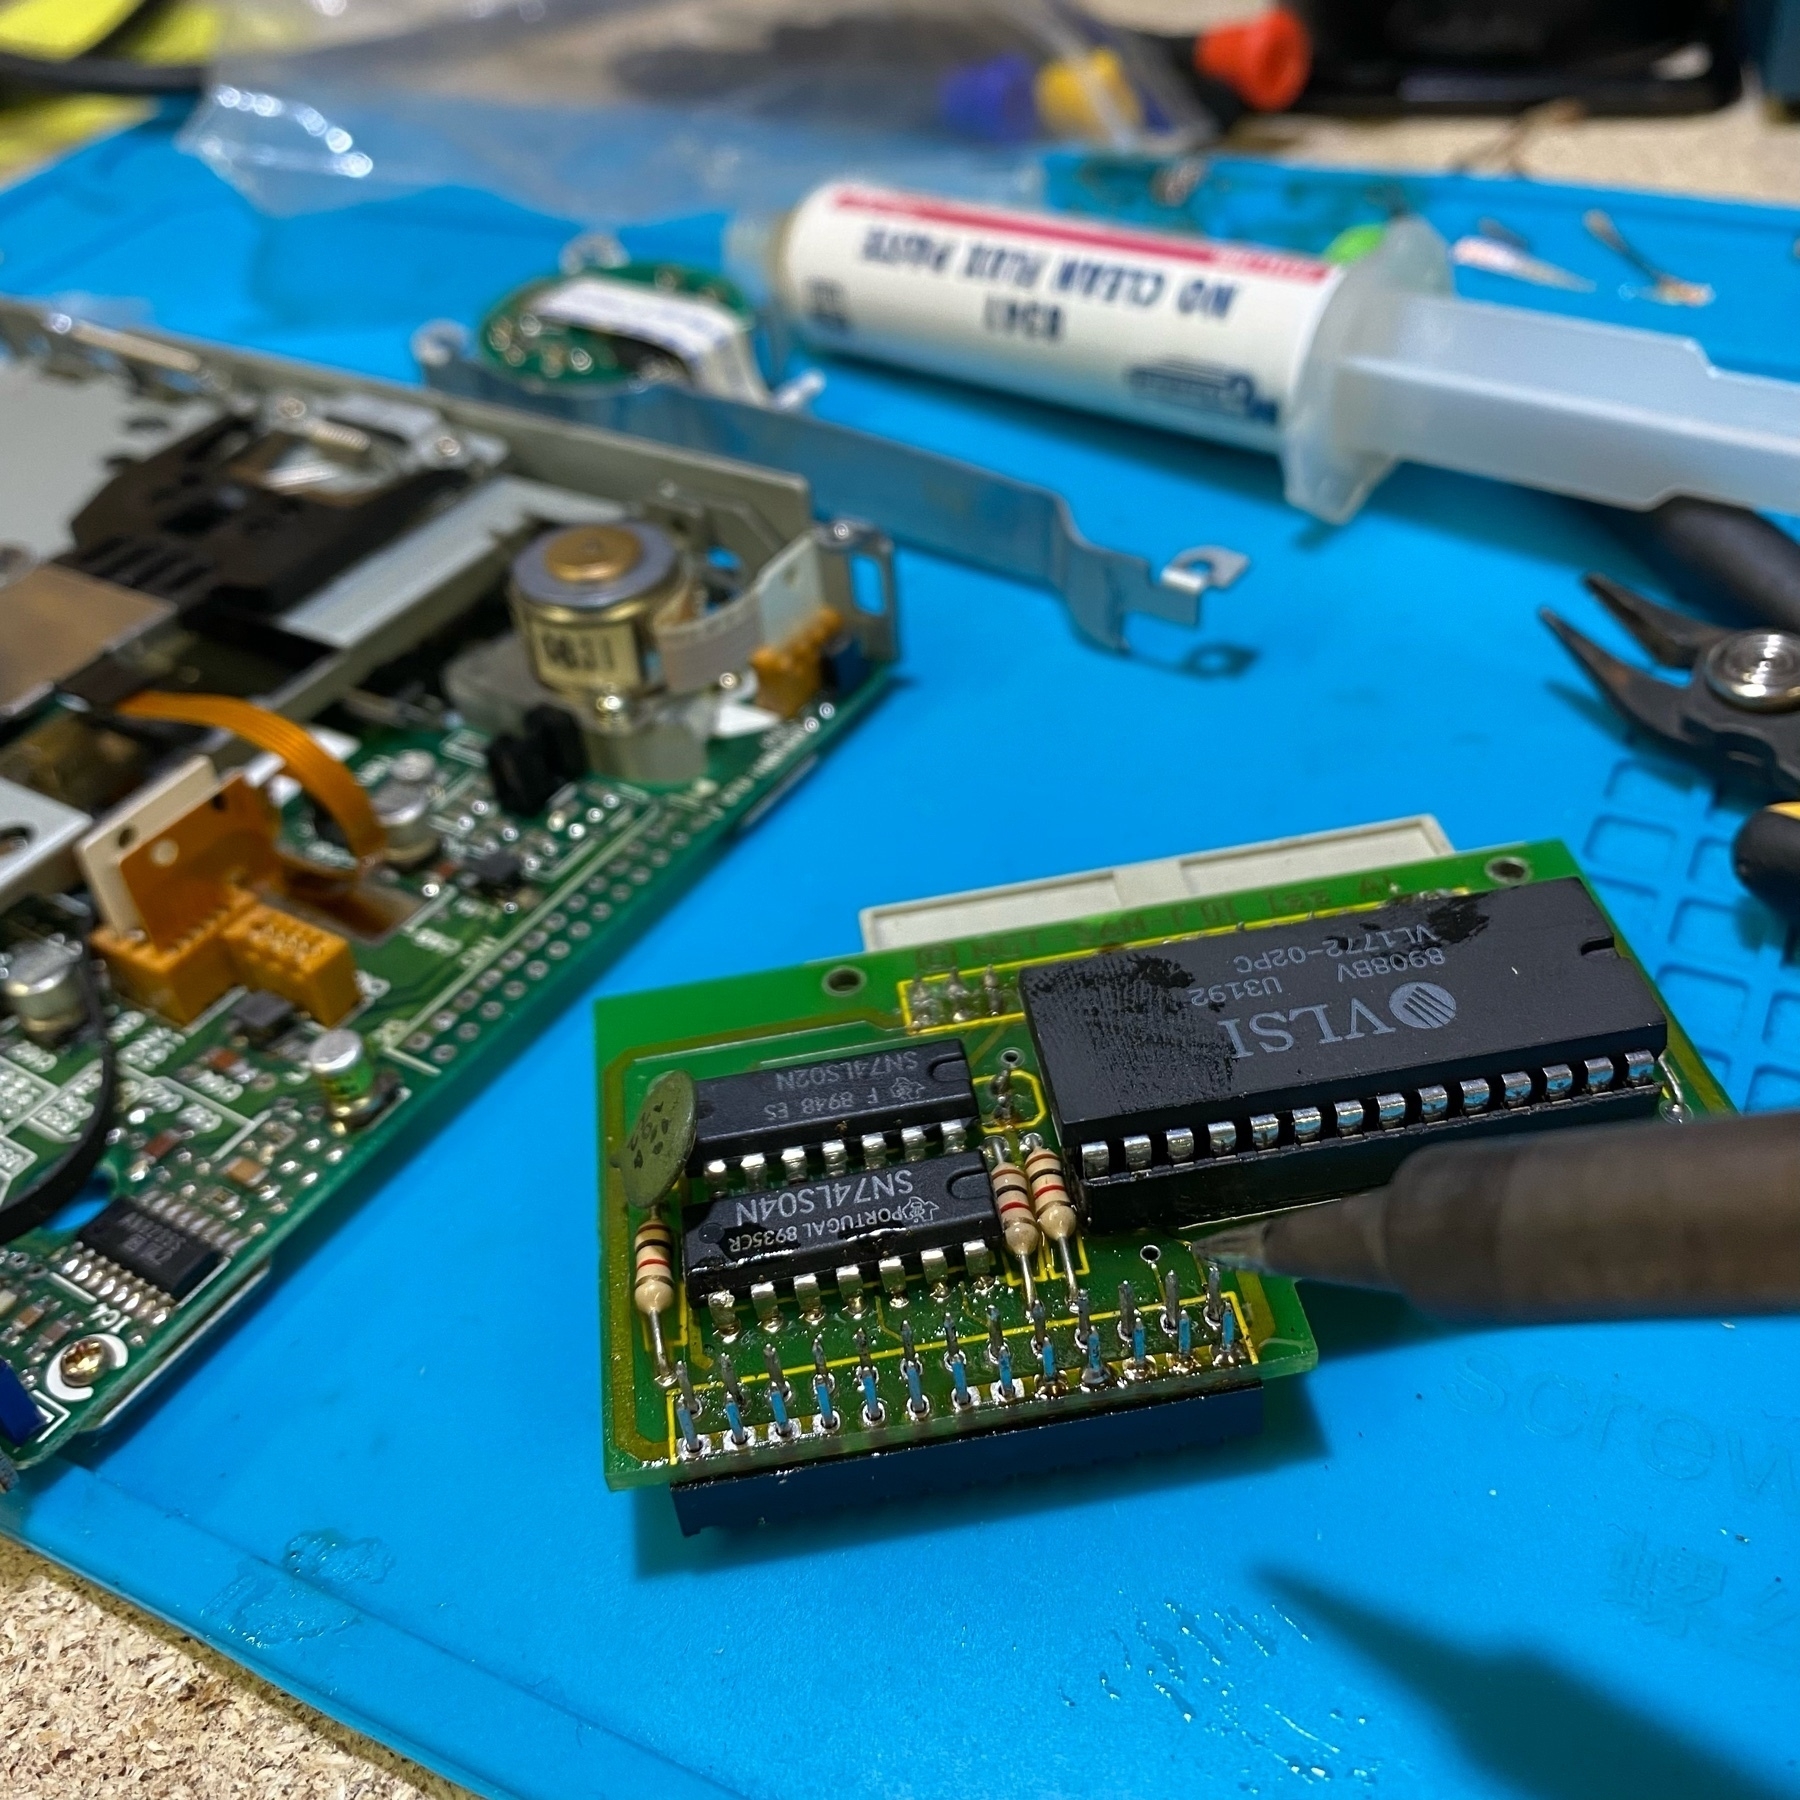 disassembled computer components on a soldering mat